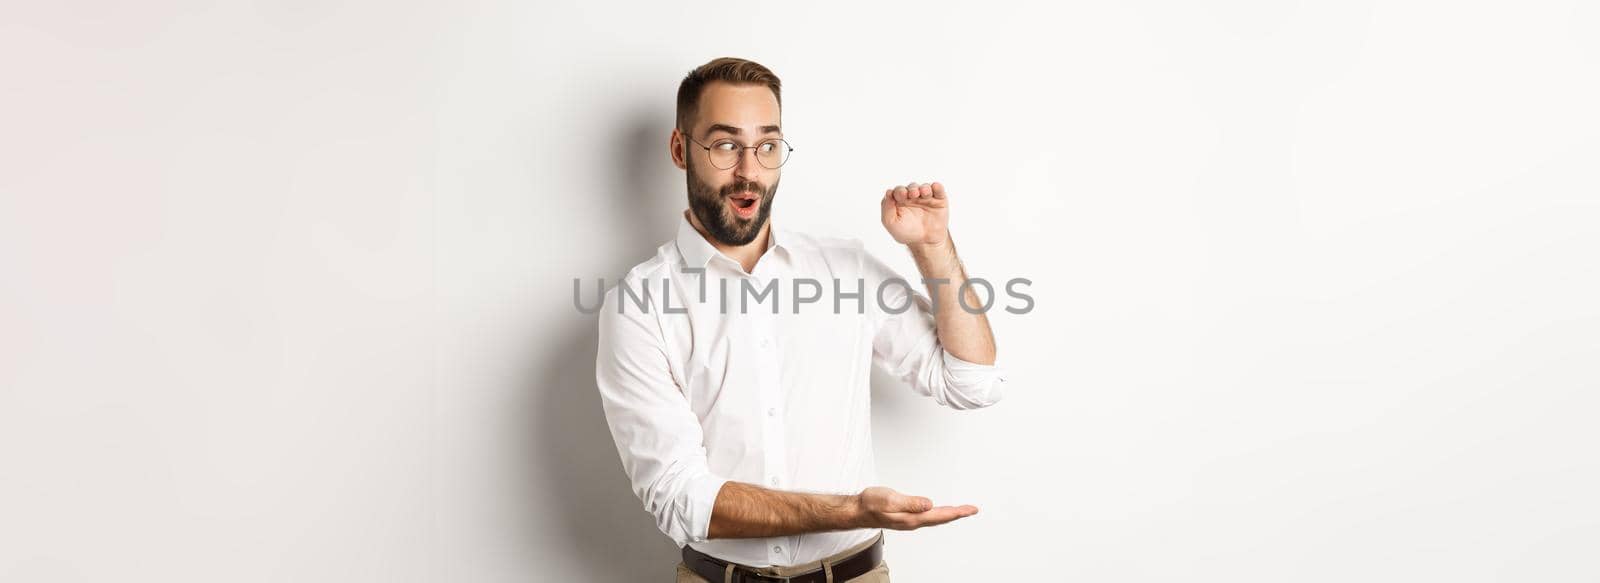 Amazed businessman showing big object, describe something large and looking excited, standing over white background.